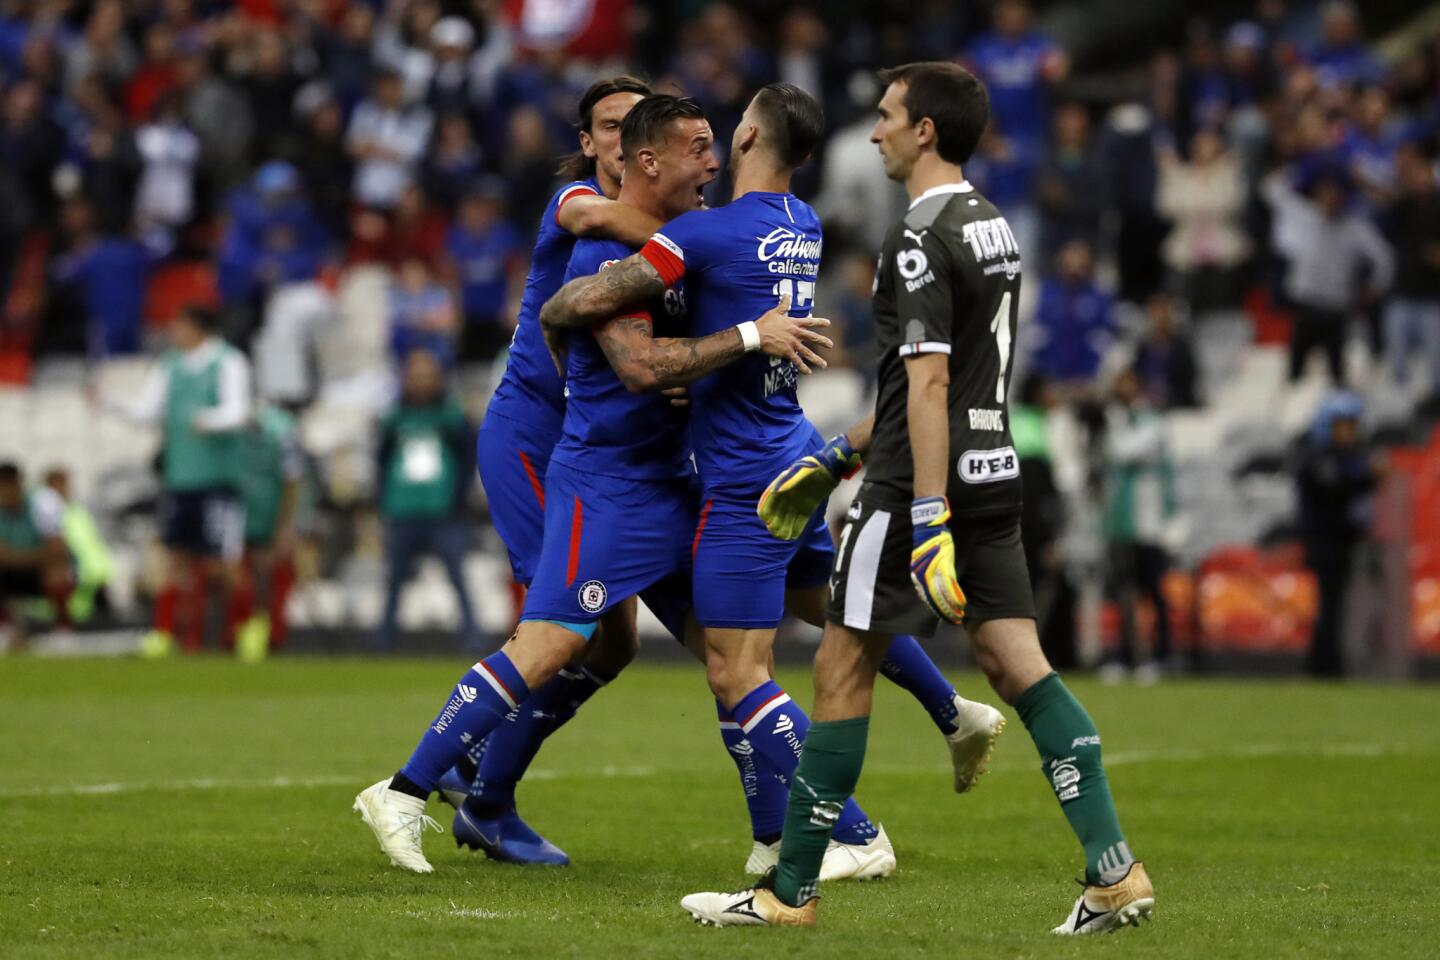 Cruz Azul players celebrate a goal scored by Milton Caraglio, second from left, against Monterrey during a Mexico soccer league second leg semifinals match against Monterrey at Azteca stadium in Mexico City, Saturday, Dec. 8, 2018. (AP Photo/Moises Castillo)